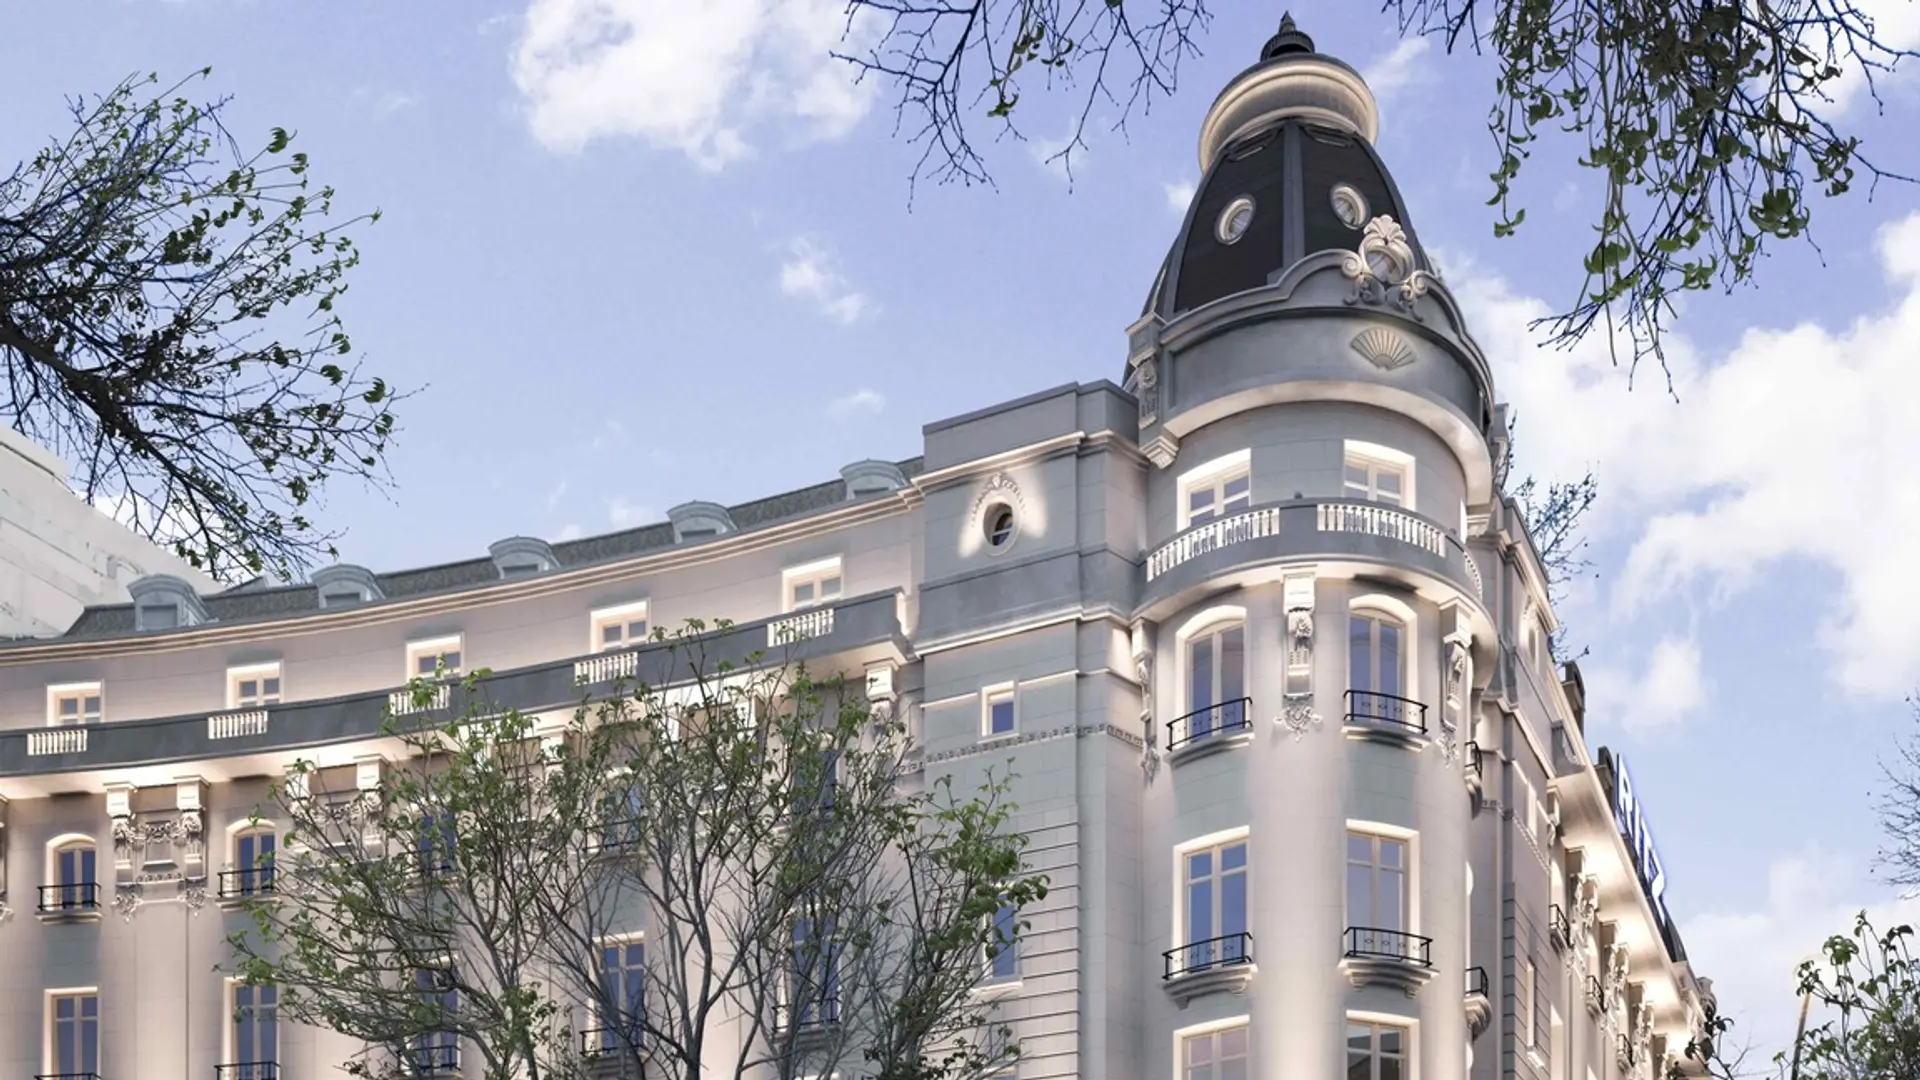 Hotels Articles - The Mandarin Oriental Ritz, Madrid debuts in the Spanish capital